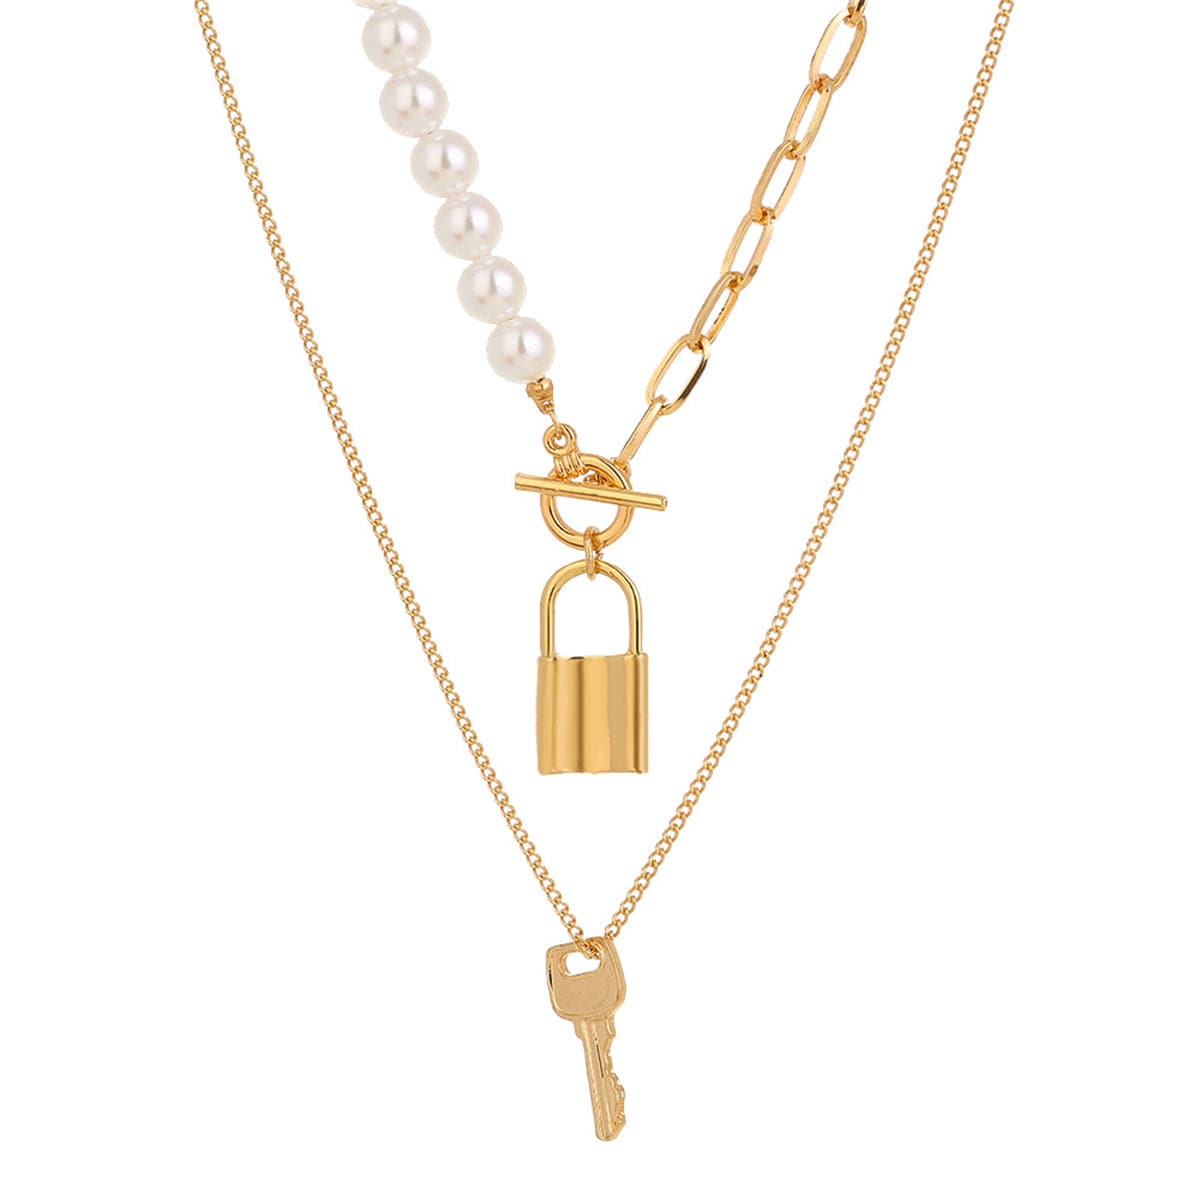 Pearl & 18K Gold-Plated Key Lock Pendant Necklace Set